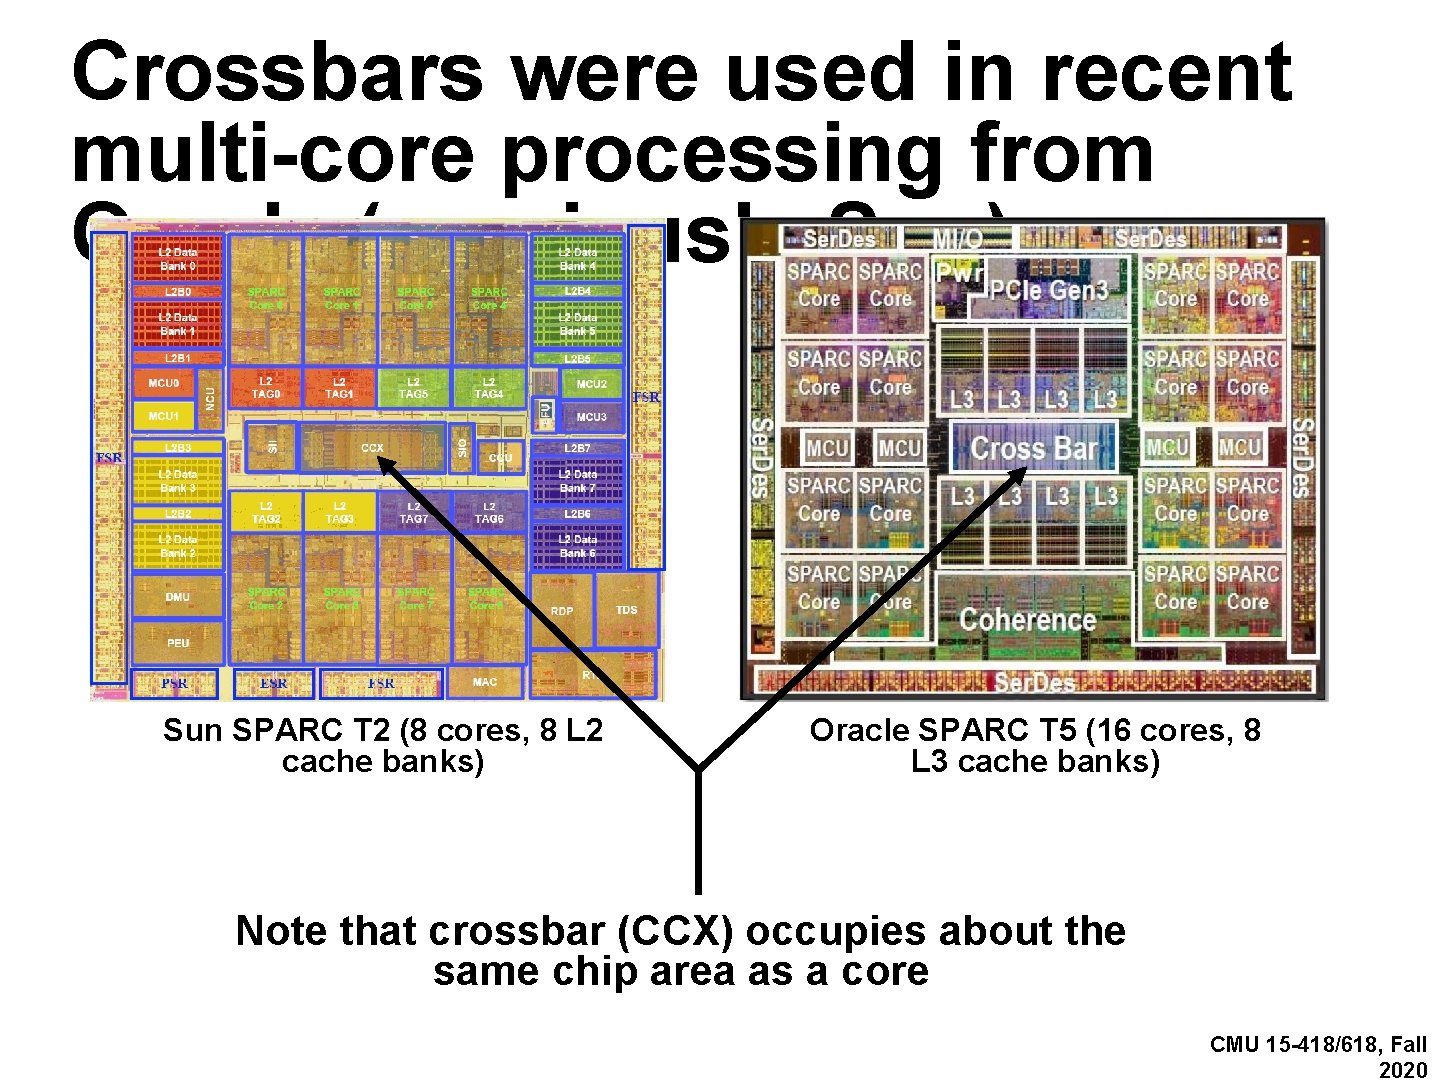 Crossbars were used in recent multi-core processing from Oracle (previously Sun) Sun SPARC T